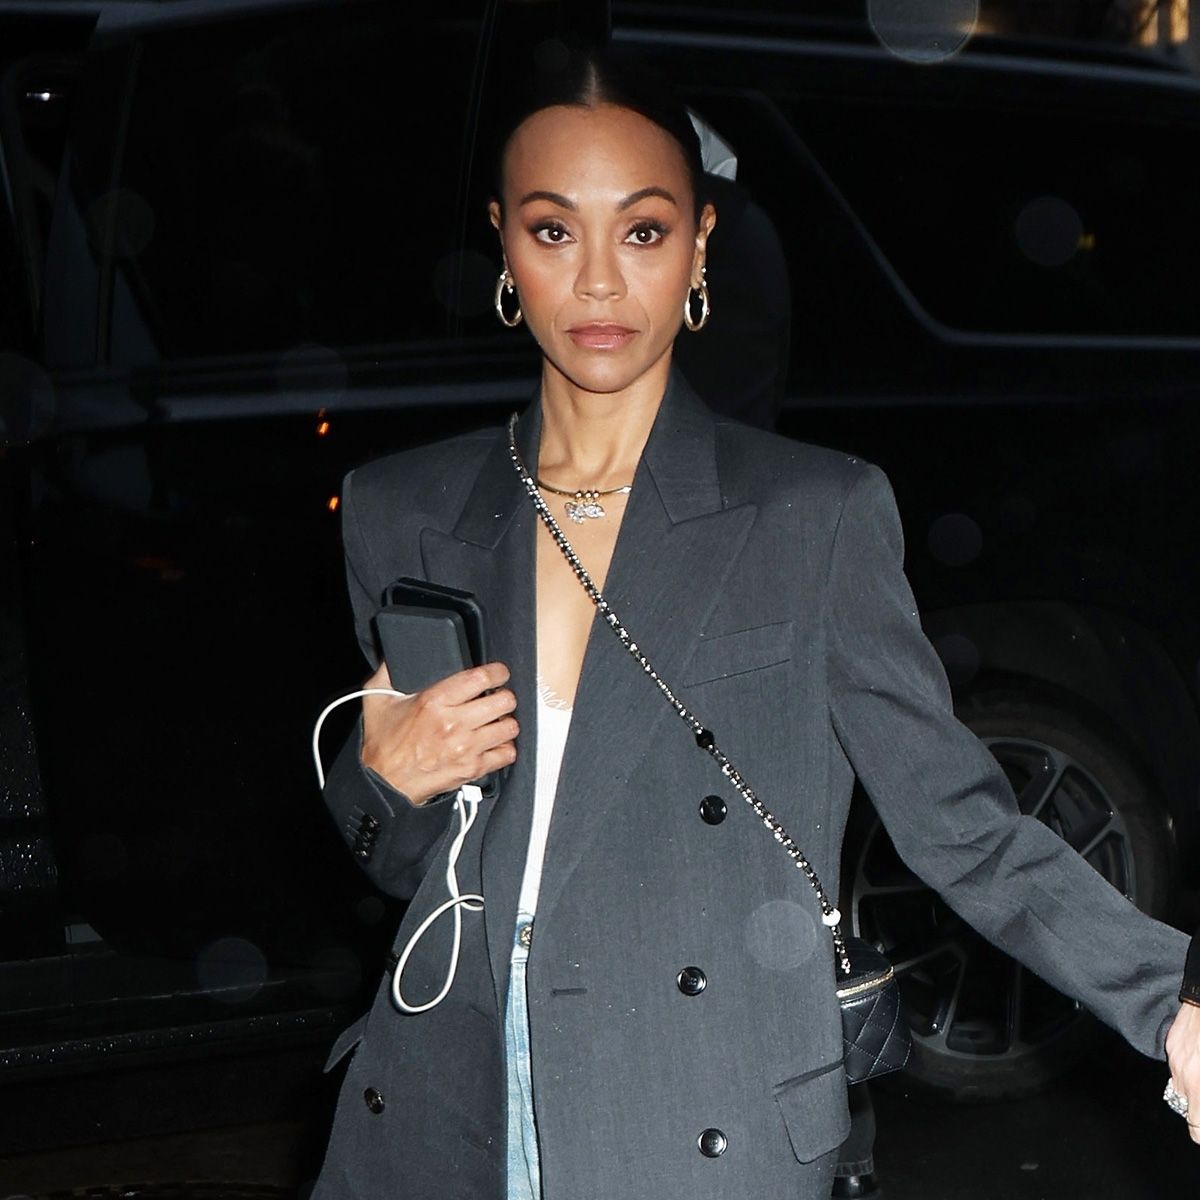 Zoe Saldaña Just Made This Controversial Bag Trend Look Incredibly Chic